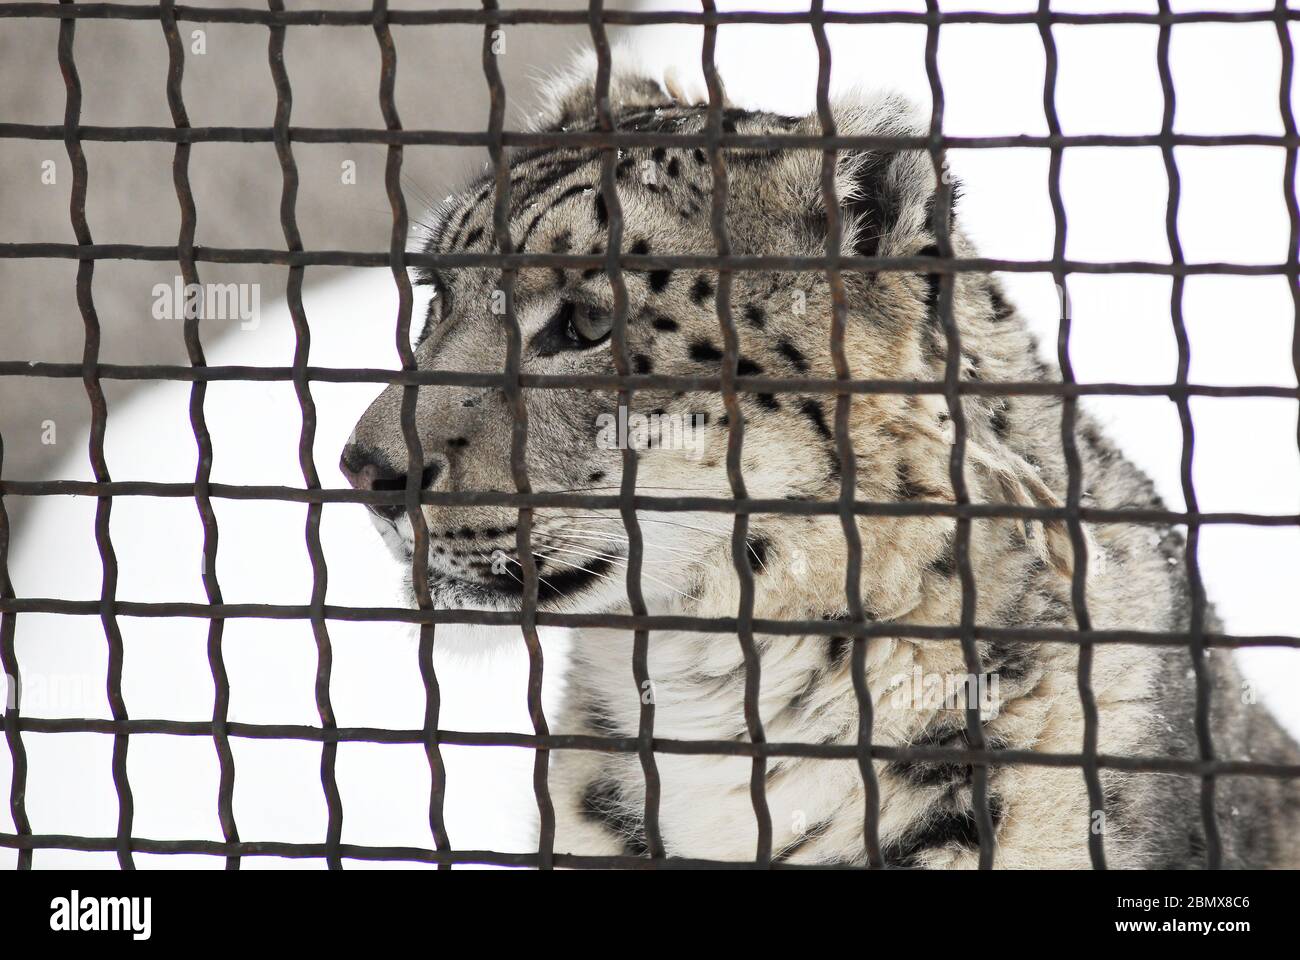 Snow leopard looking bored in the zoo grid Stock Photo